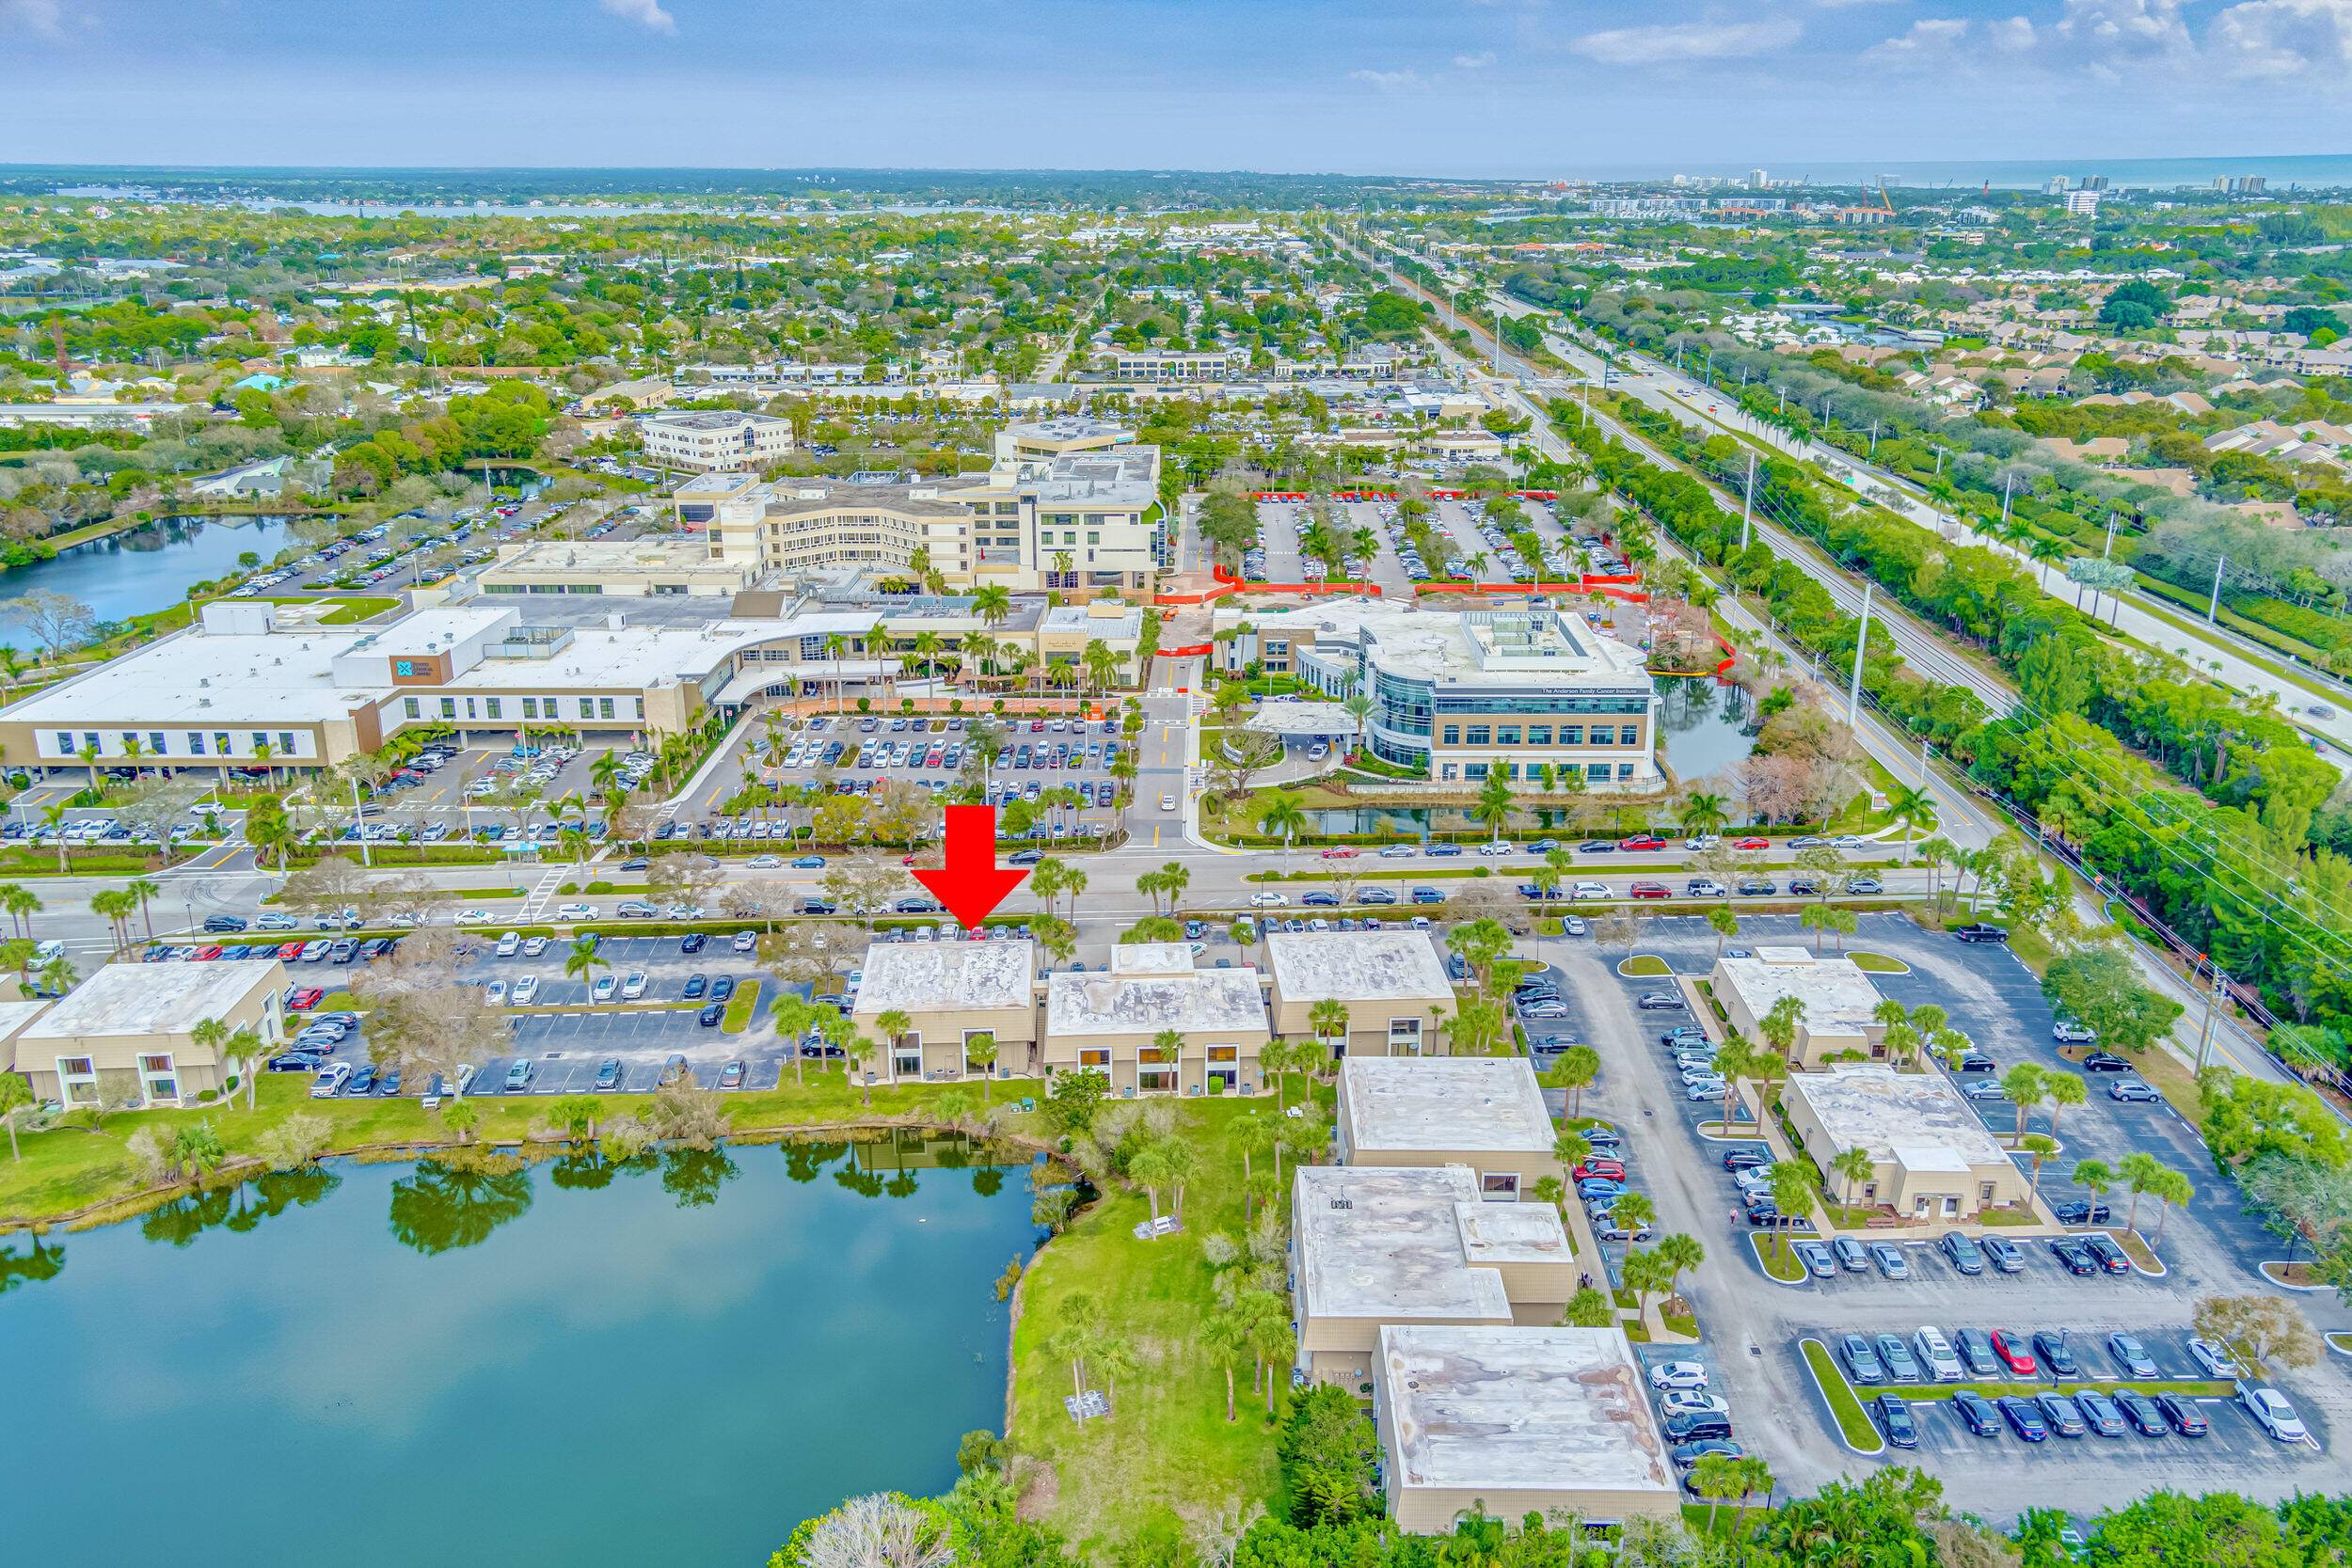 This is an exceptional opportunity to lease an office medical space in the vibrant community of Jupiter, Florida.